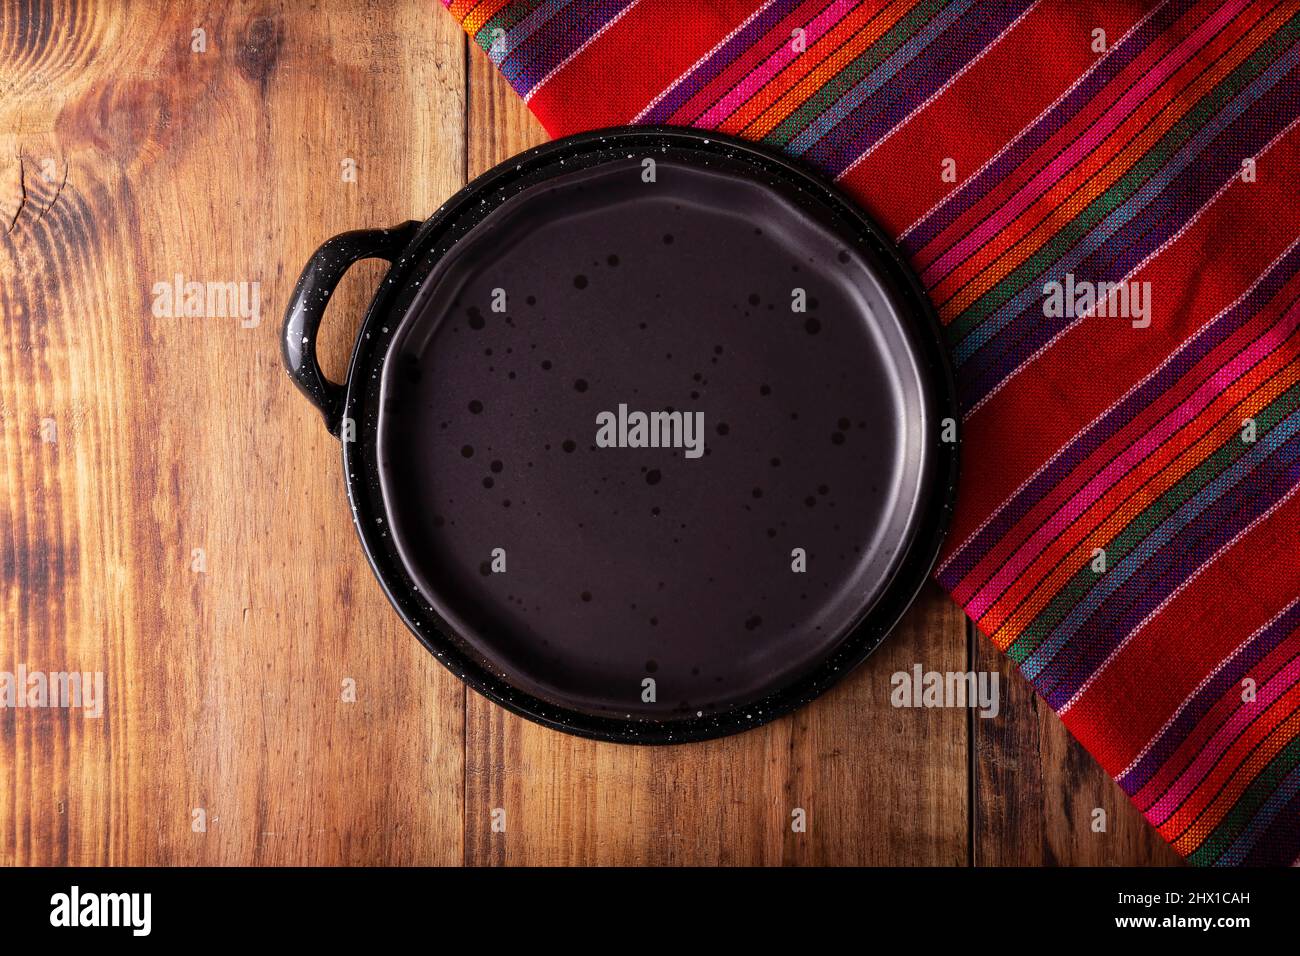 https://c8.alamy.com/comp/2HX1CAH/mexican-kitchen-utensils-colorful-traditional-fabric-empty-black-plate-on-comal-de-peltre-on-wooden-rustic-table-flatlay-2HX1CAH.jpg